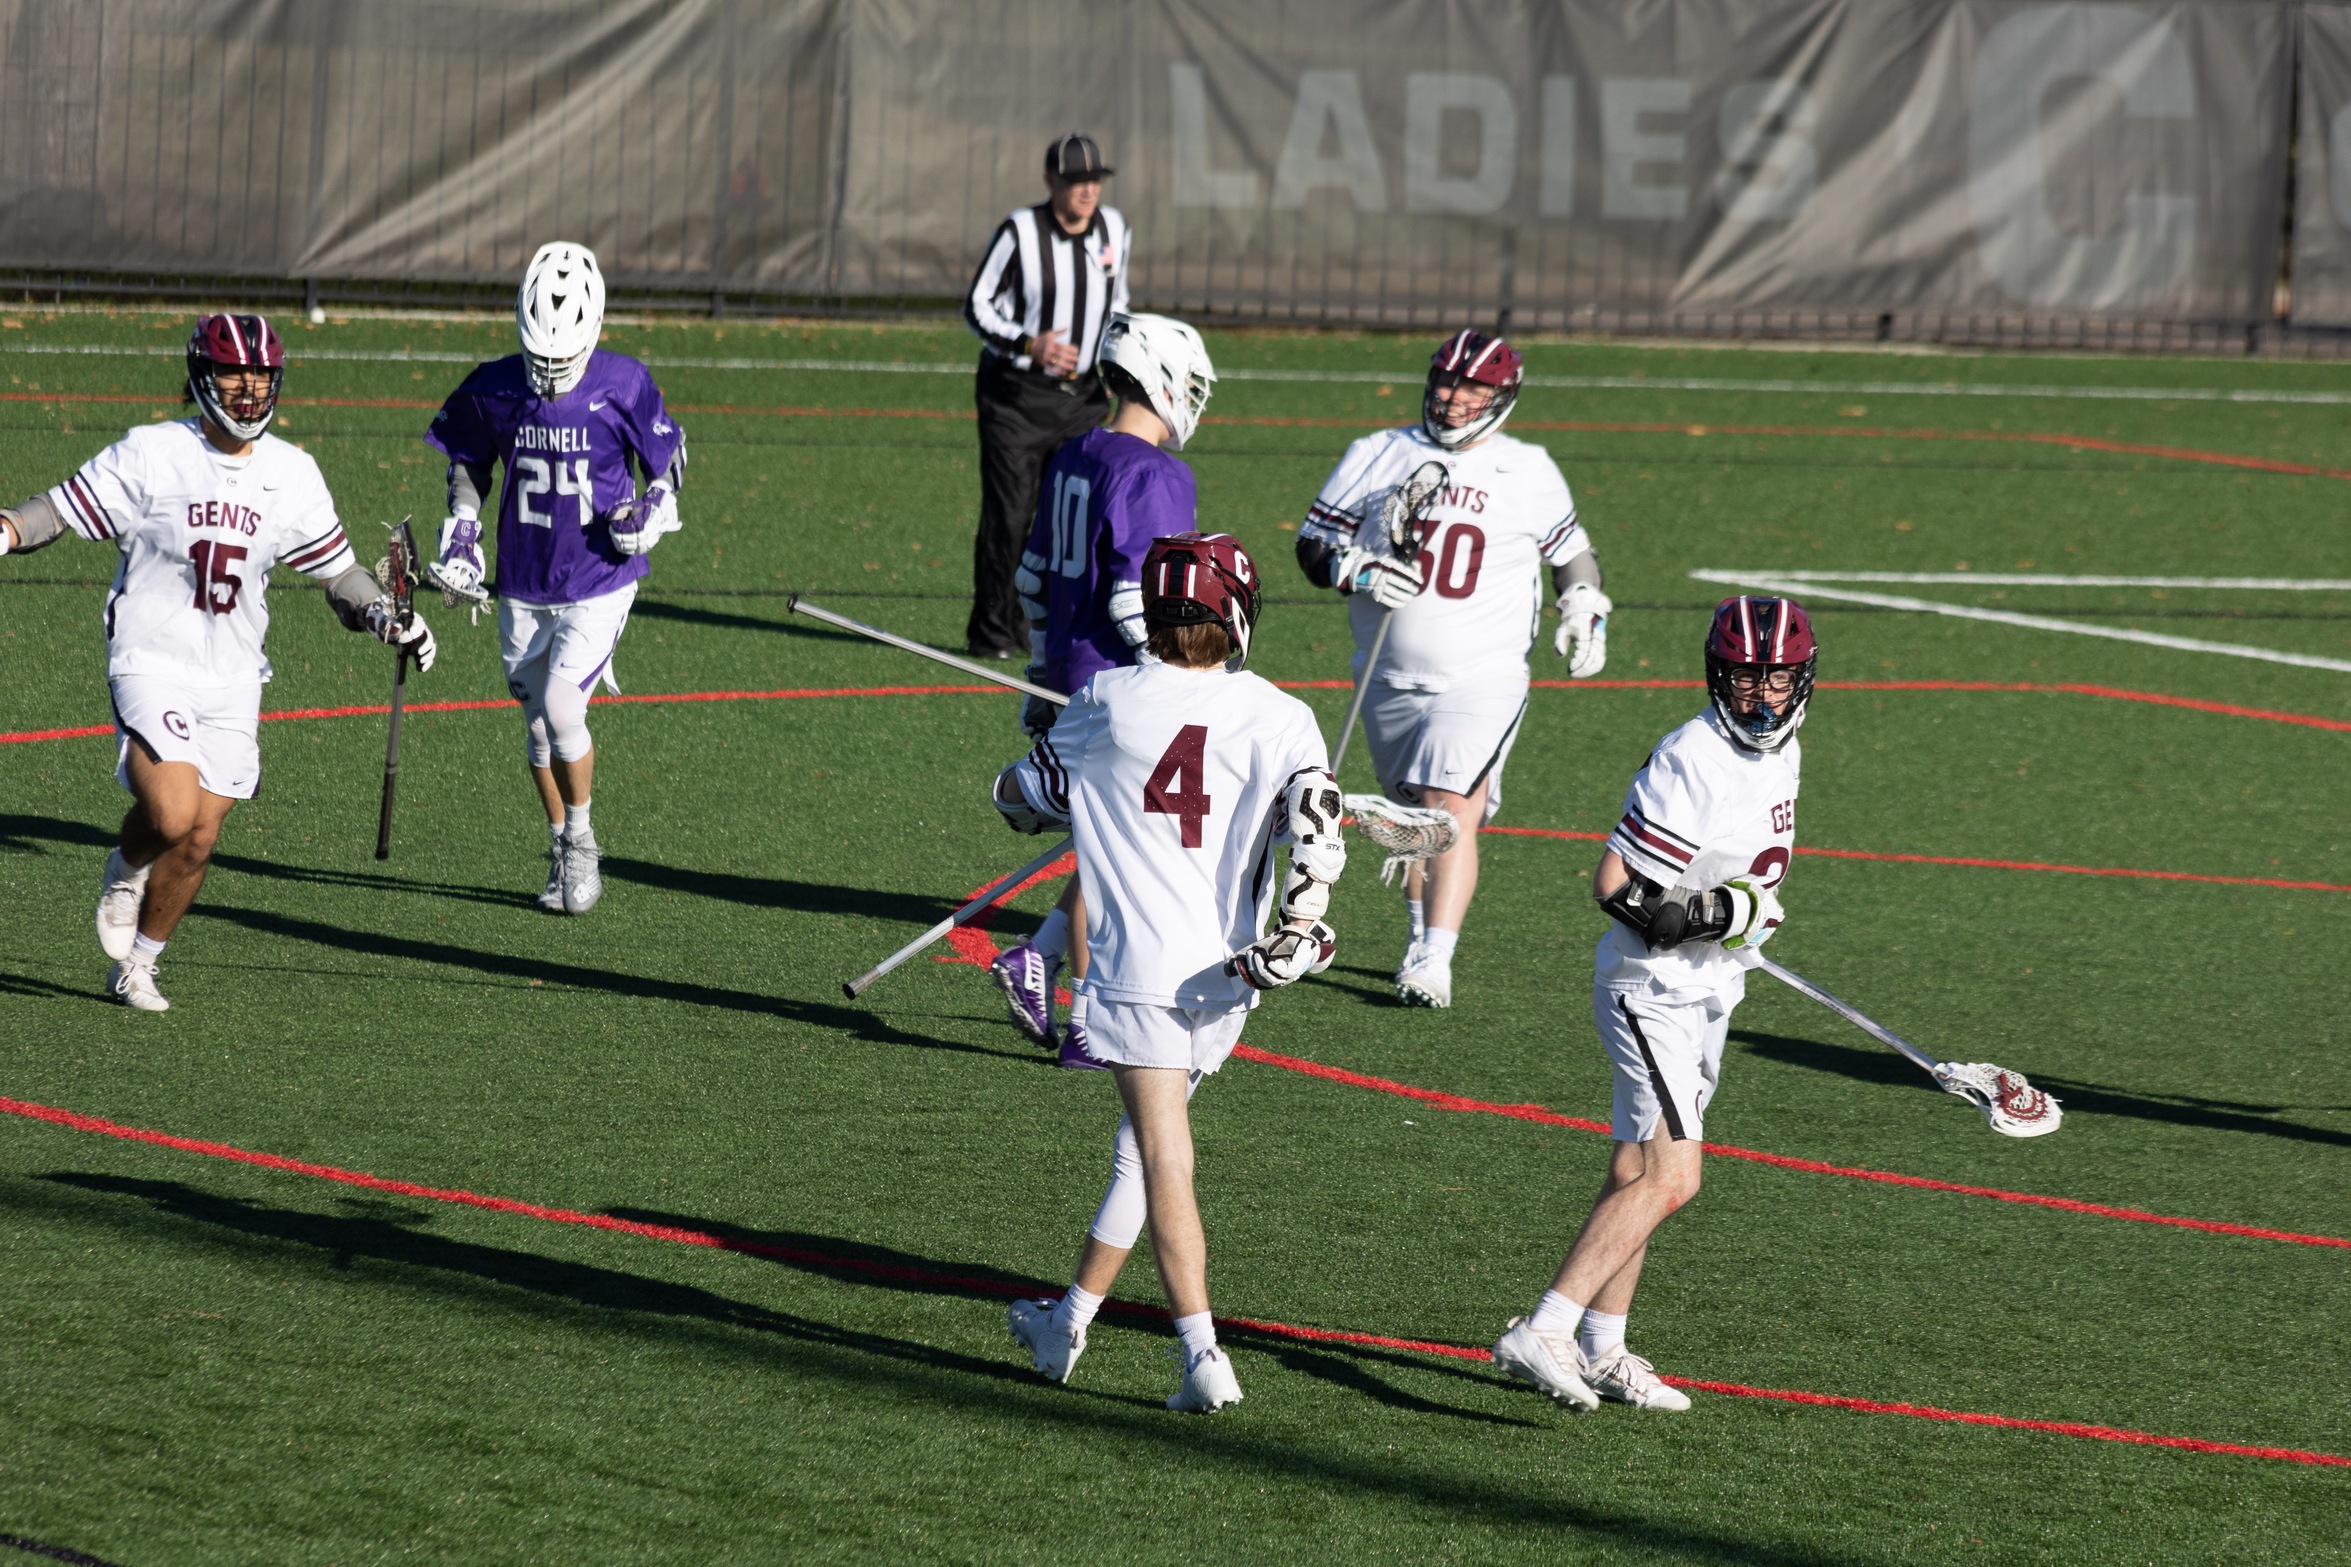 The Gents fell 12-8 to Cornell College on Saturday in their home opener.